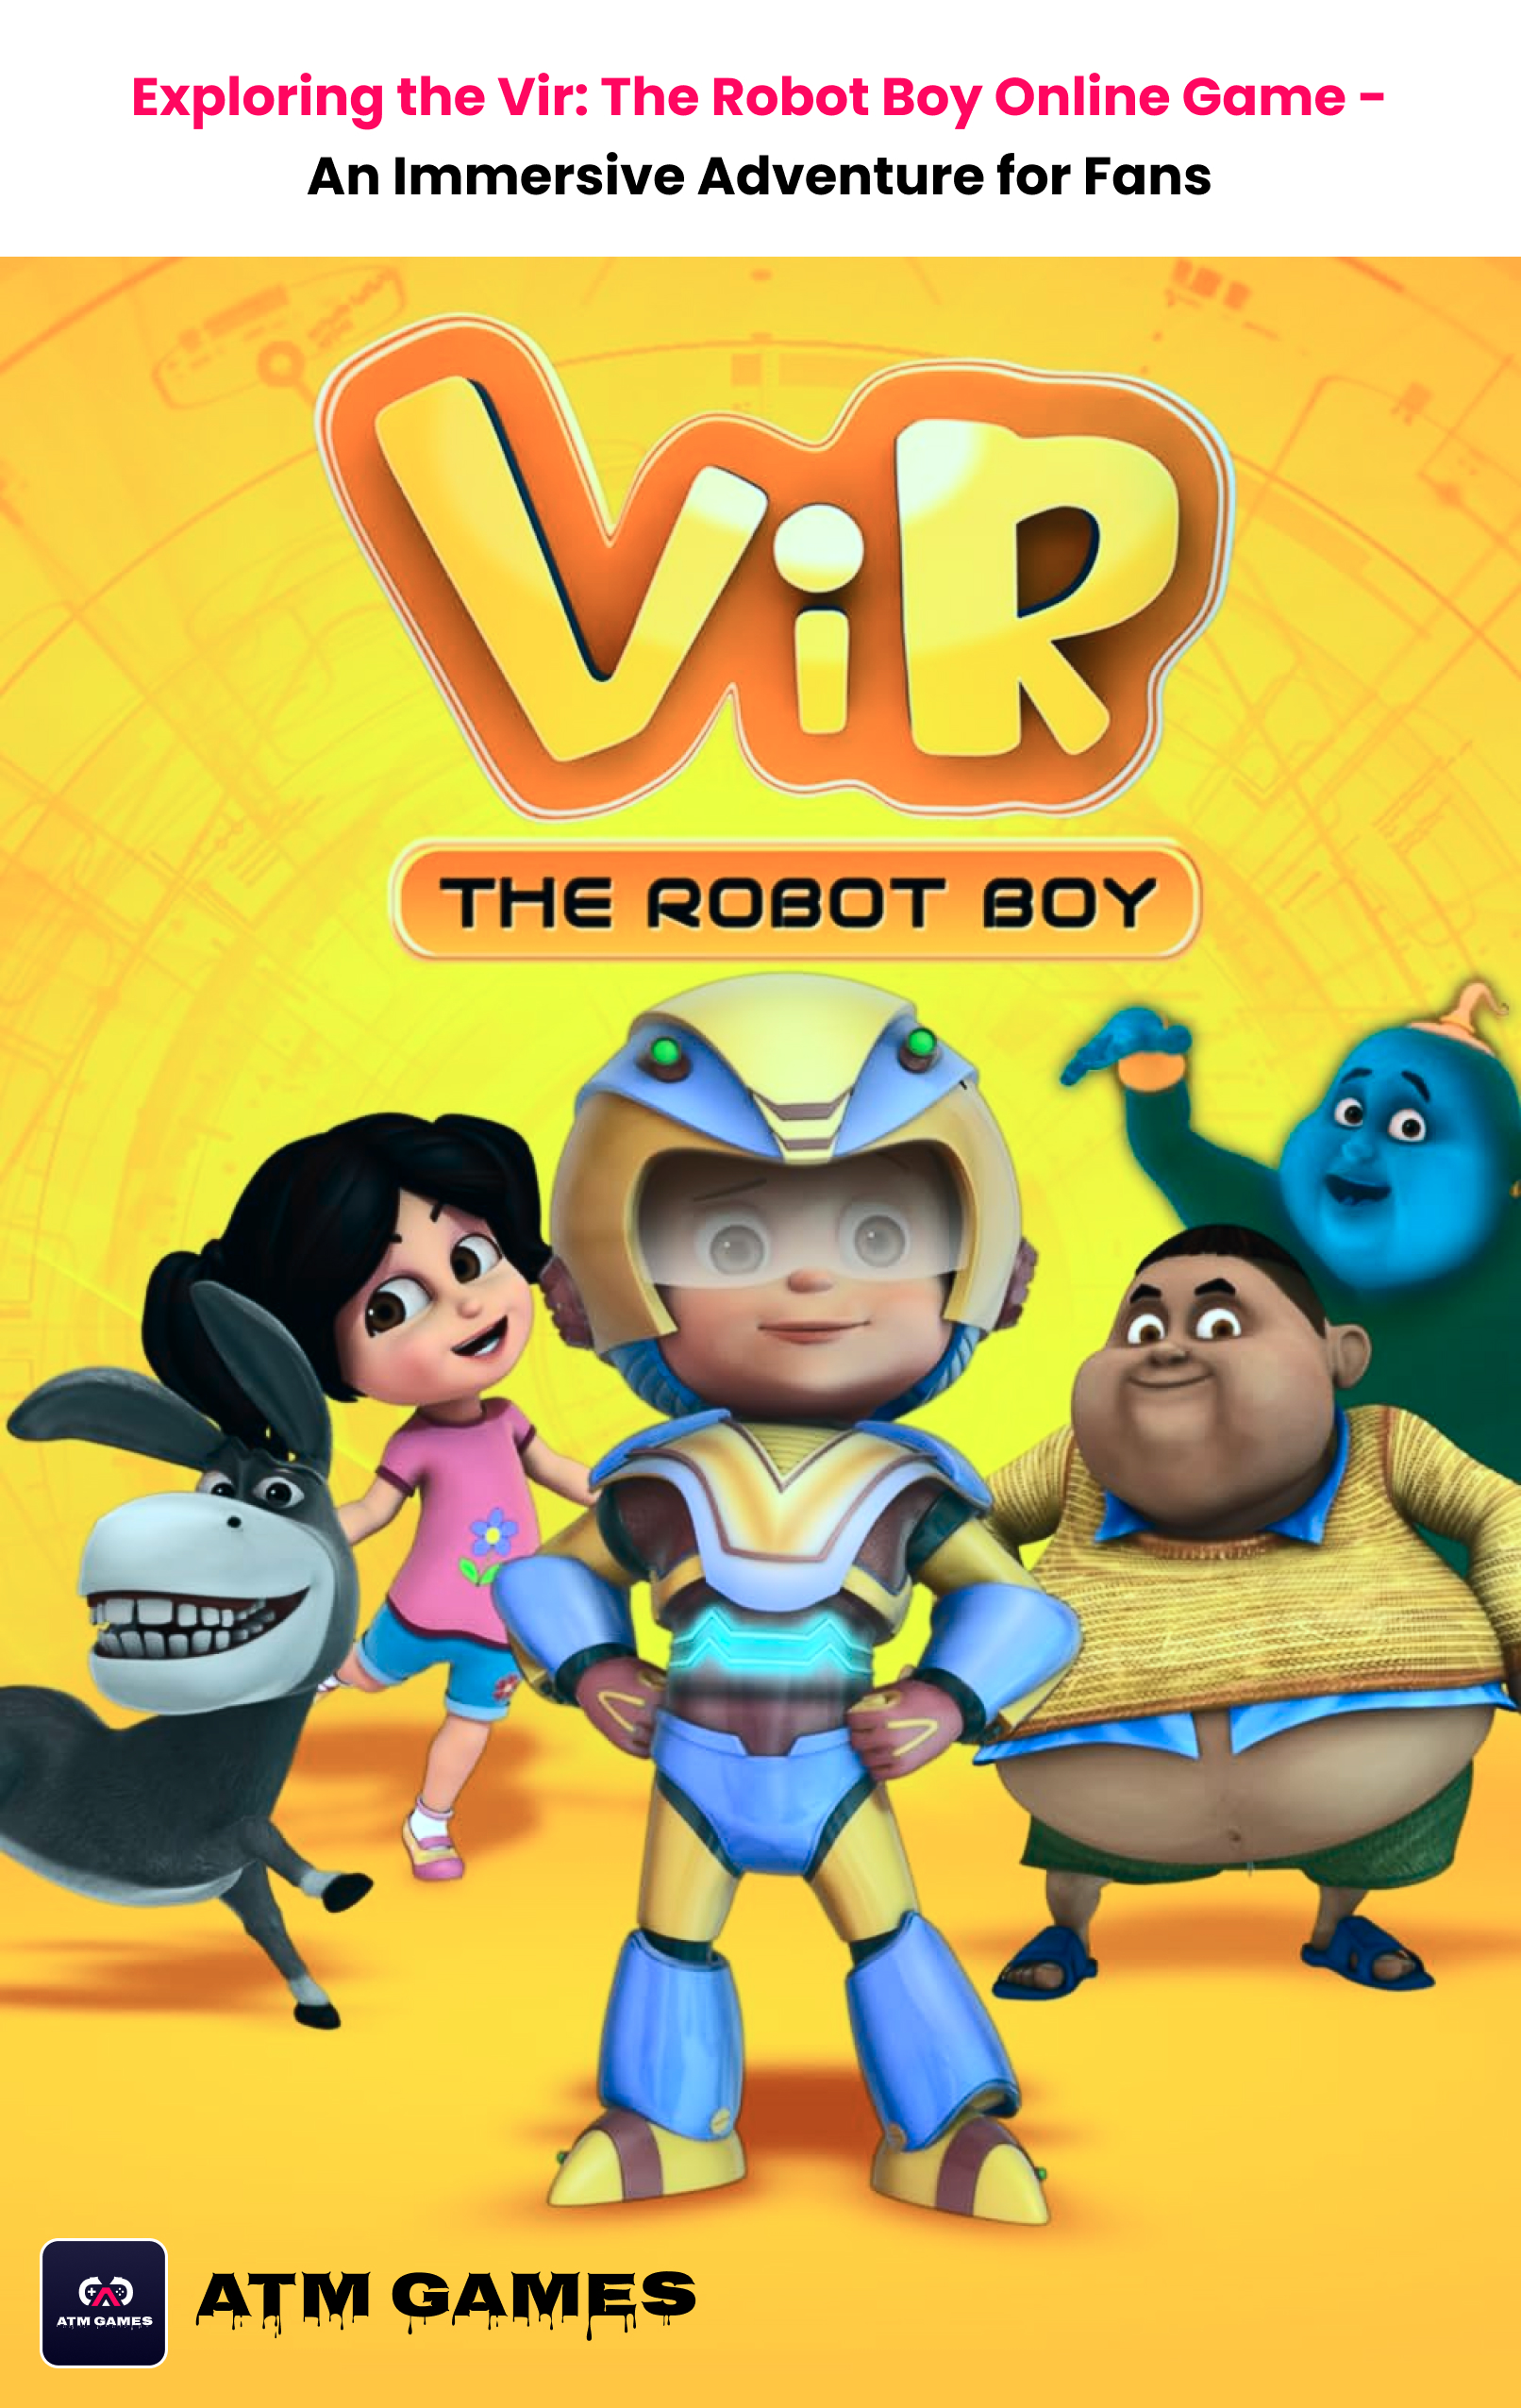 Exploring the Vir: The Robot Boy Online Game - An Immersive Adventure for Fans